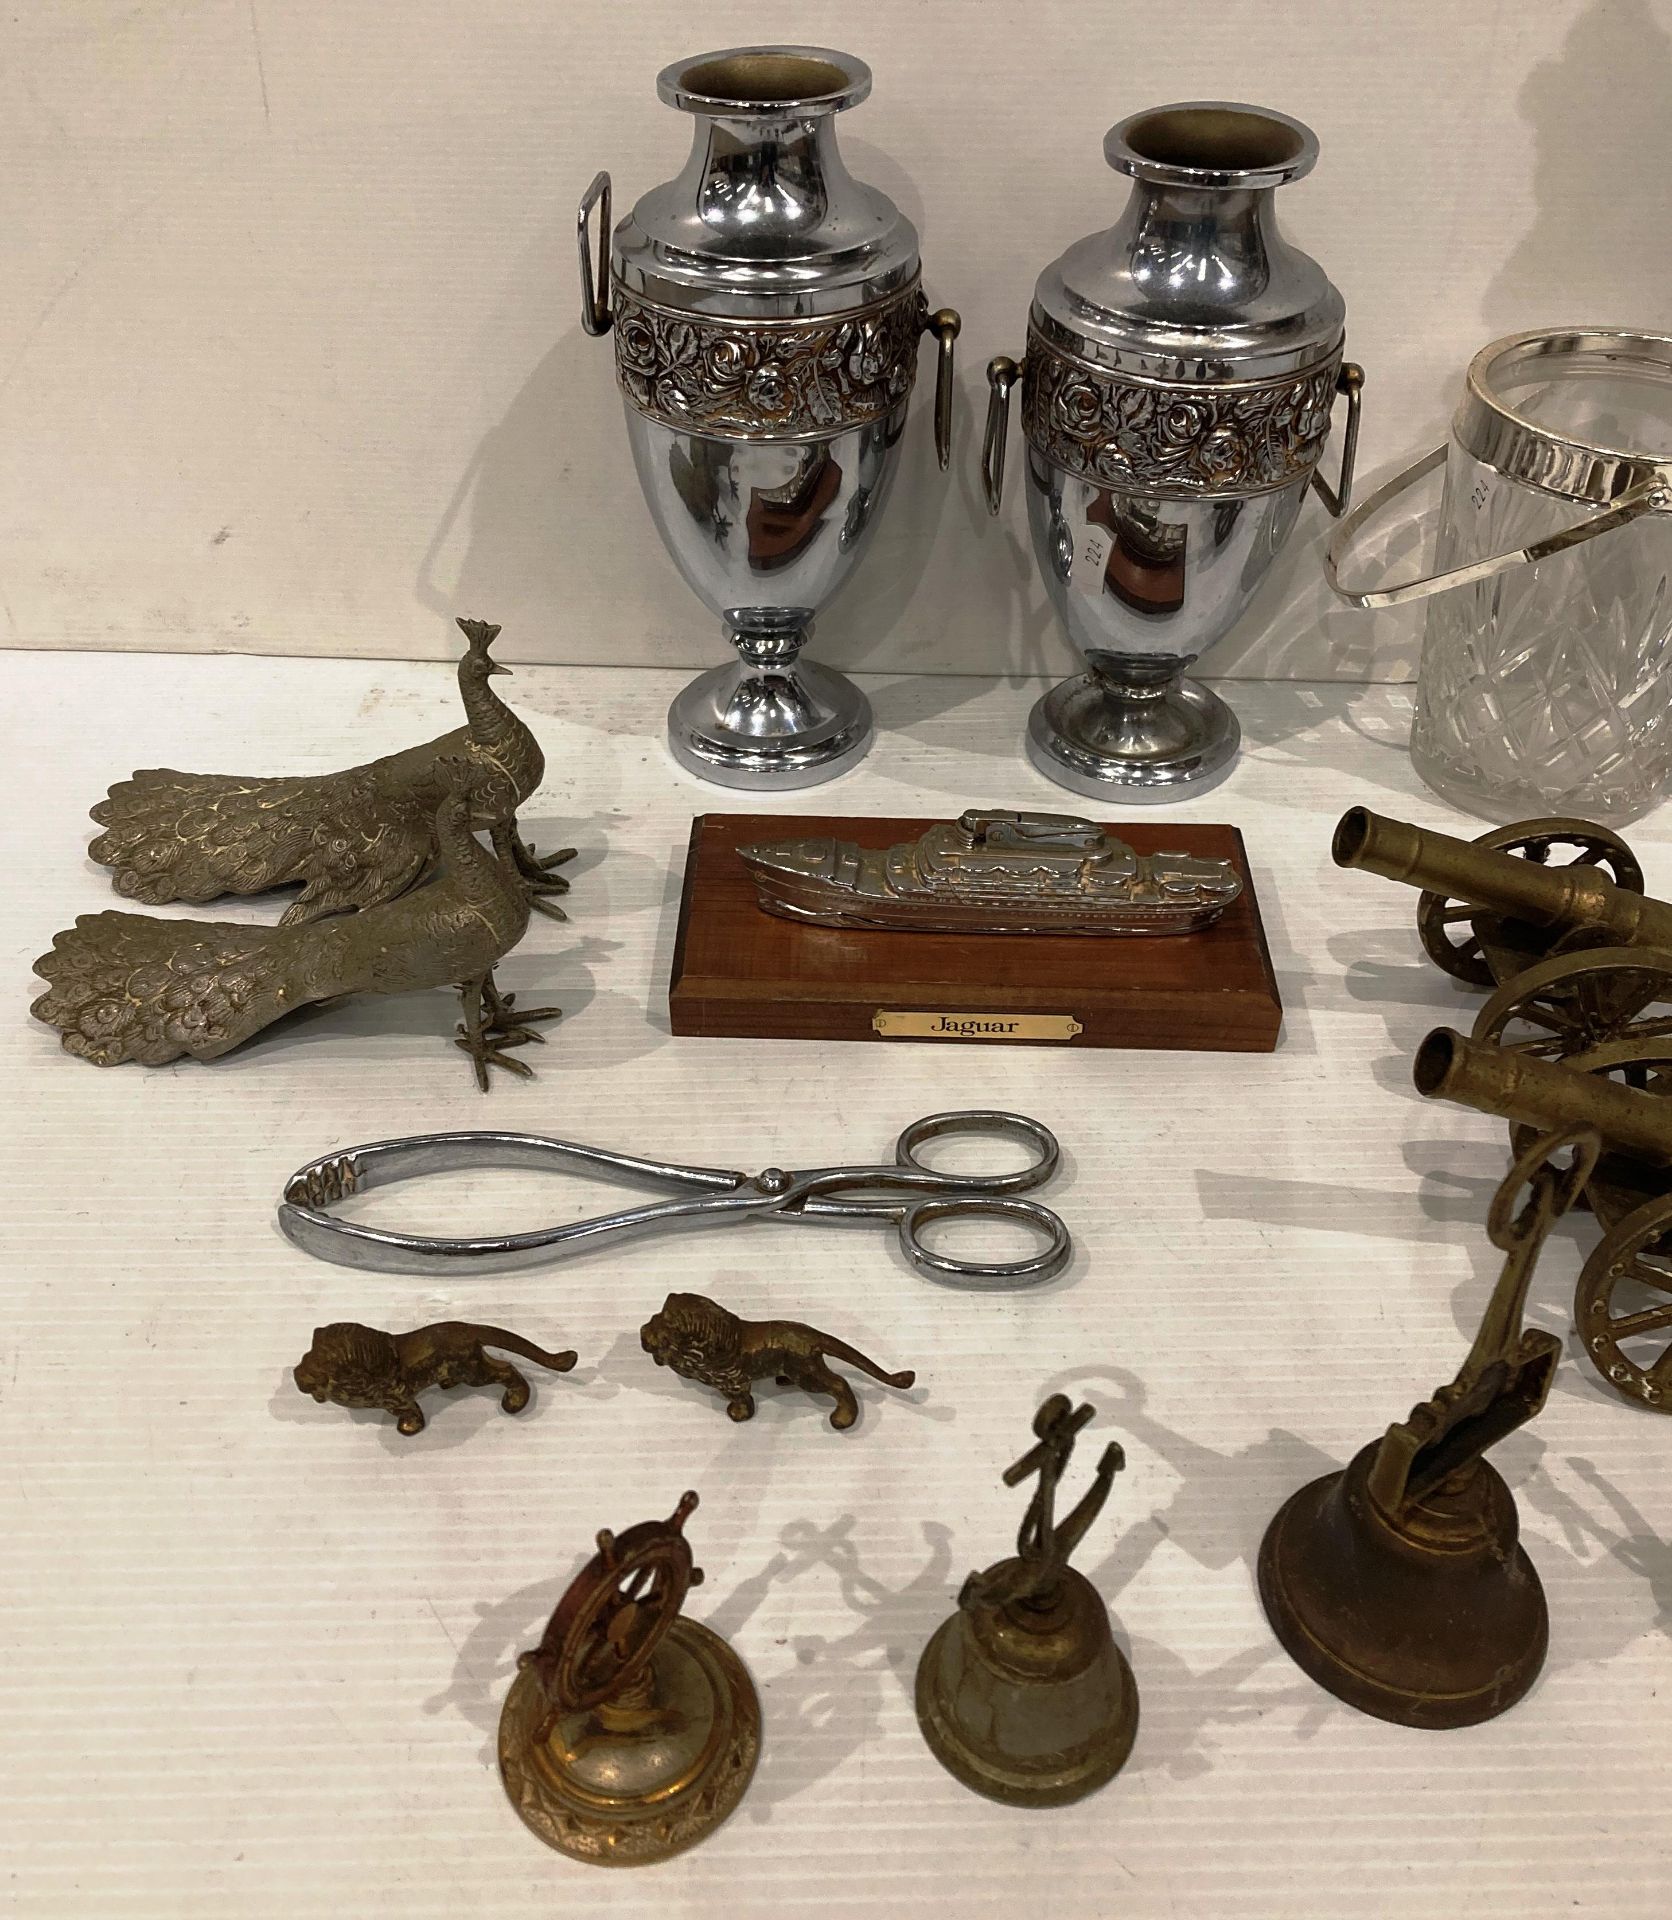 Contents to crate - Edinburgh Crystal ice bucket, pair of silver plated urns, pair of brass cannons, - Image 2 of 3